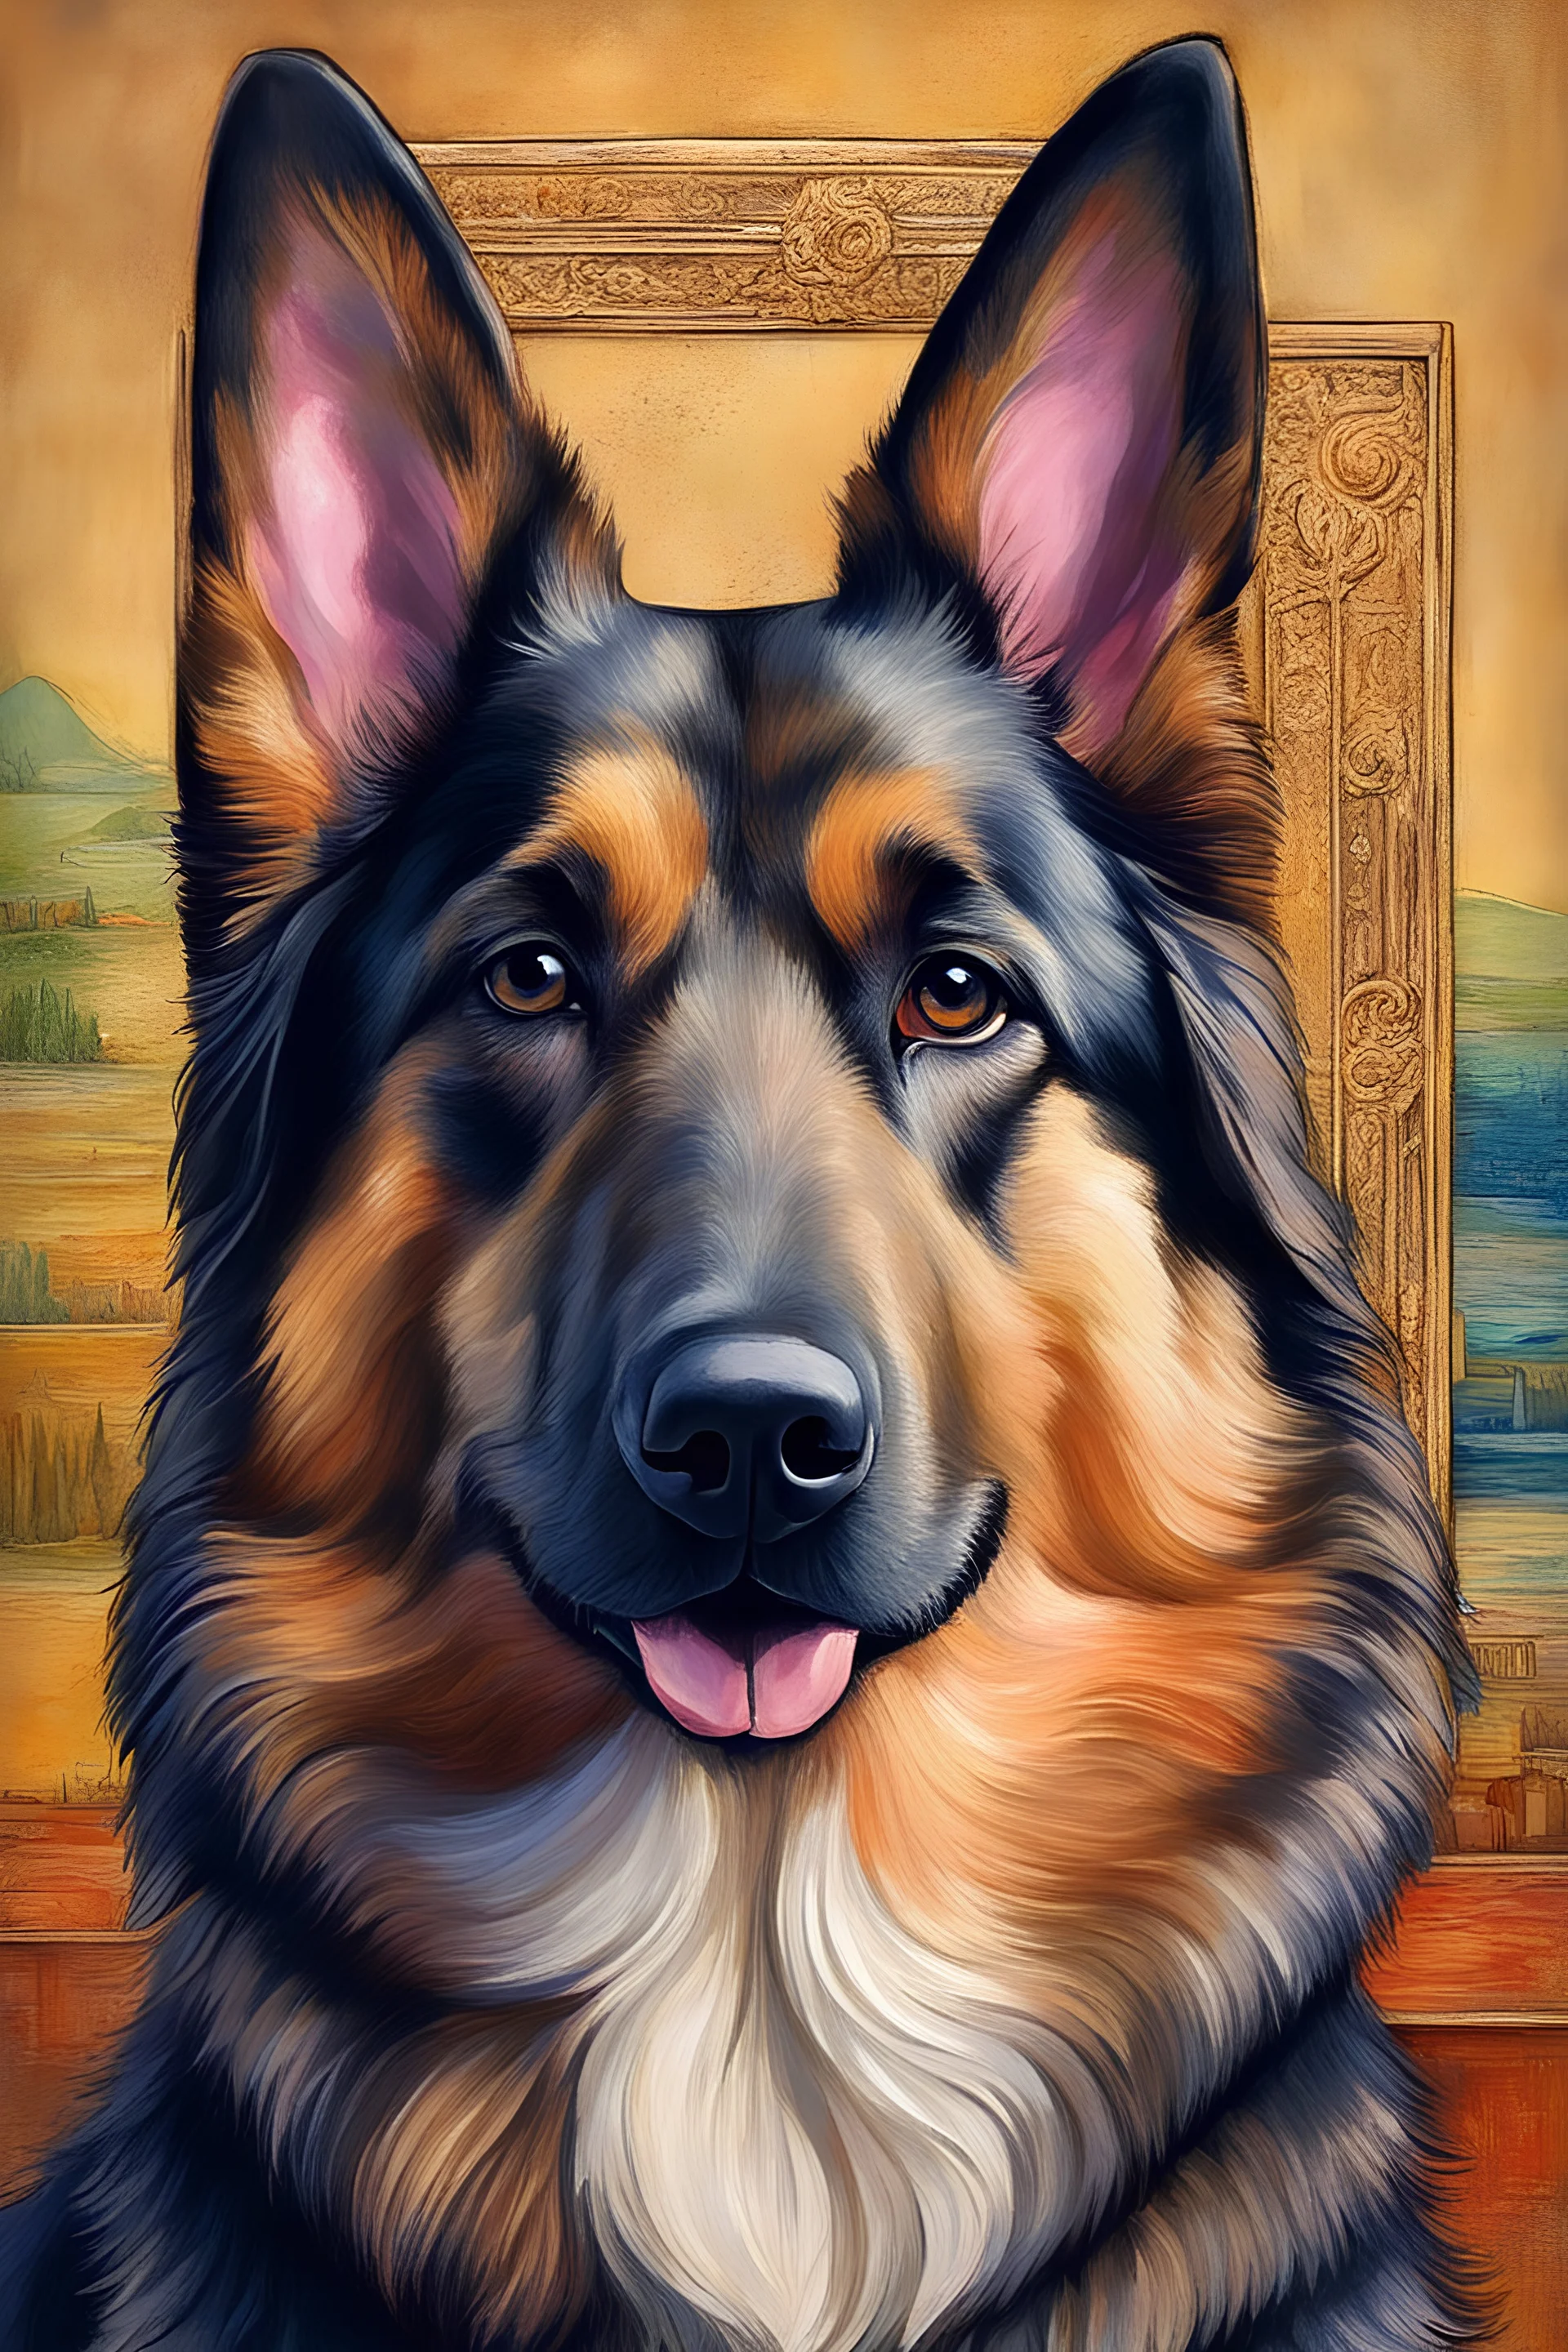 /imagine prompt: paint a German Shepherd dog into a unique masterpiece in the likeness of the Mona Lisa featuring her enigmatic smile on the cat by artist Leonardo DaVinci. The German Shepherd dog is to look like the Mona Lisa in this interpretation. Utilise crayons as the medium, capture the essence of DaVinci's iconic style.